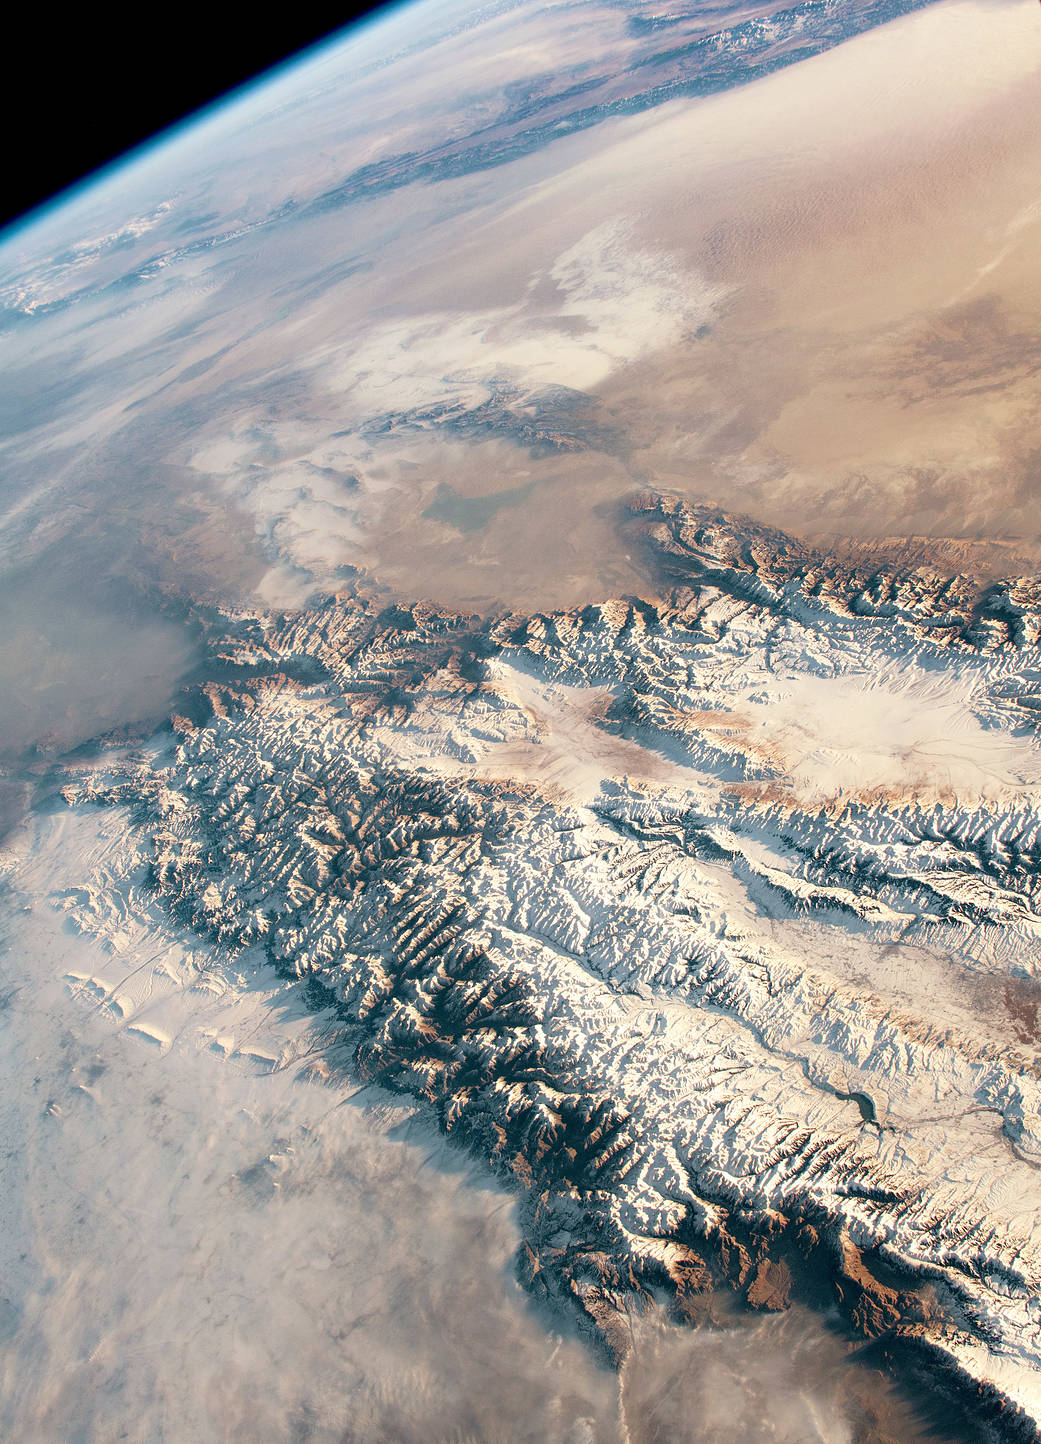 View from orbit of snowy mountain range and desert